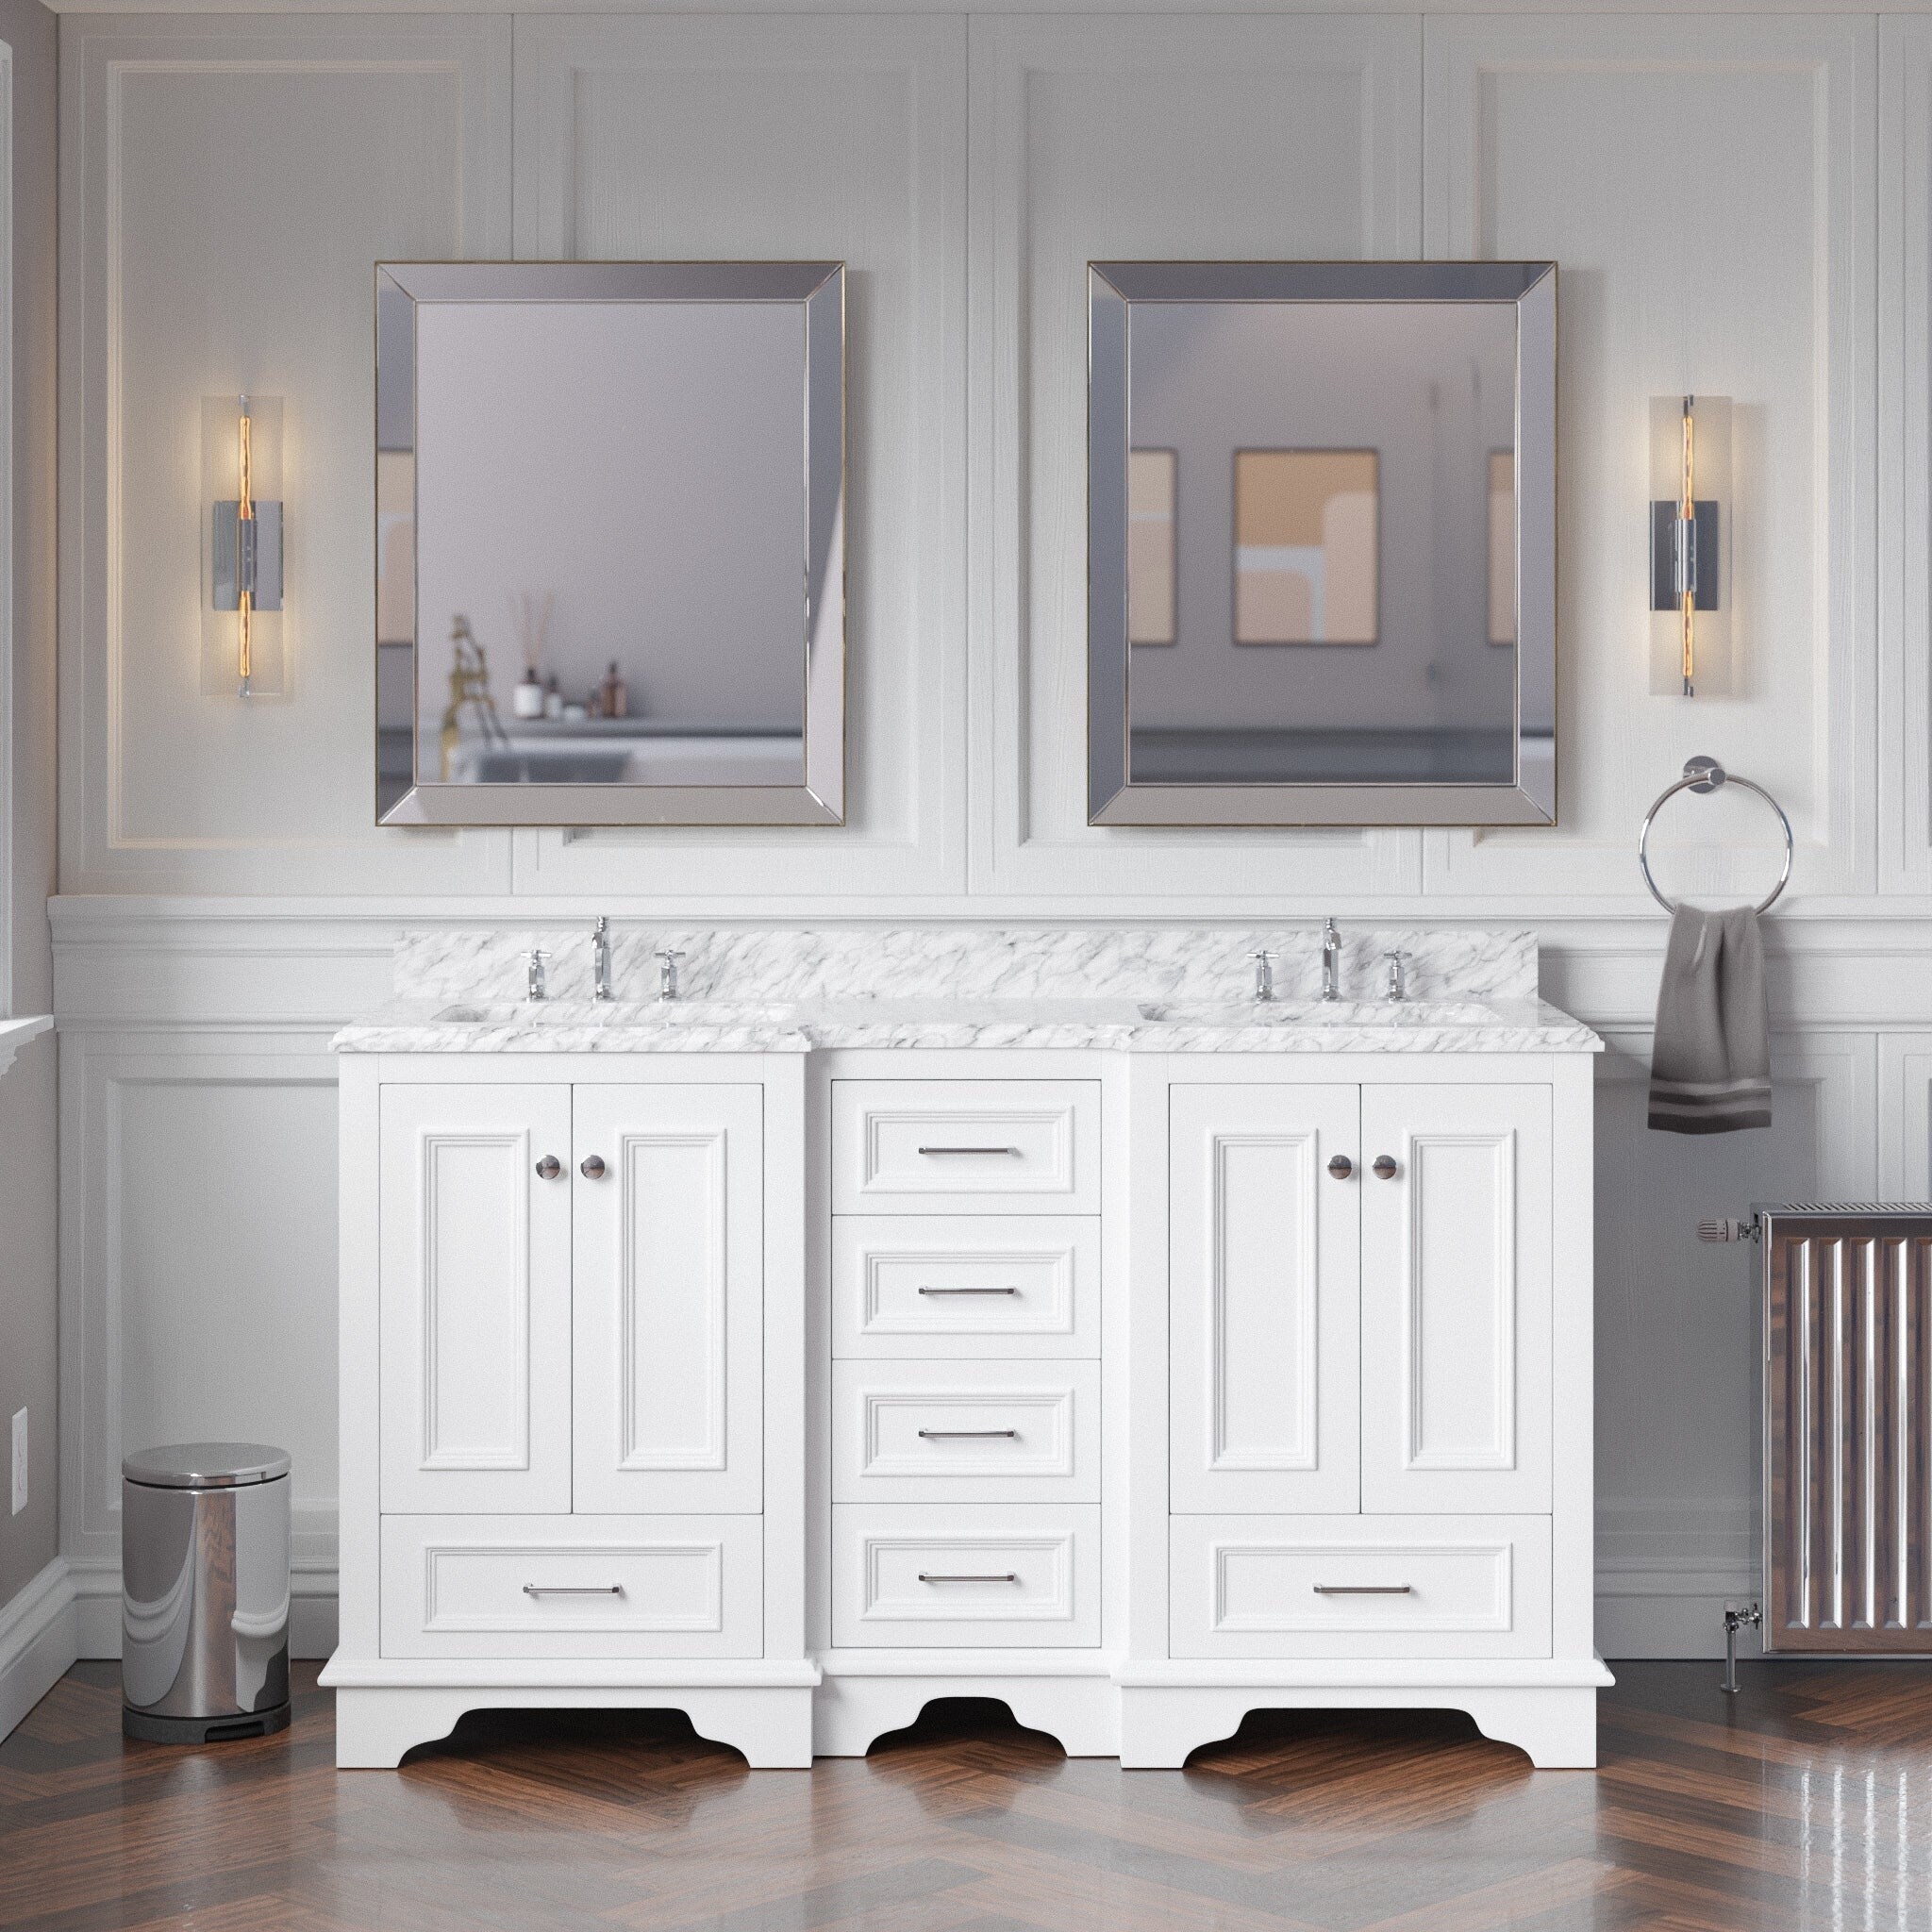 https://ak1.ostkcdn.com/images/products/is/images/direct/1ac9a10213ea86f2c76baf27ab54e4a57c3317e4/KitchenBathCollection-Nantucket-60%22-Double-Bathroom-Vanity-with-Carrara-Marble-Top.jpg